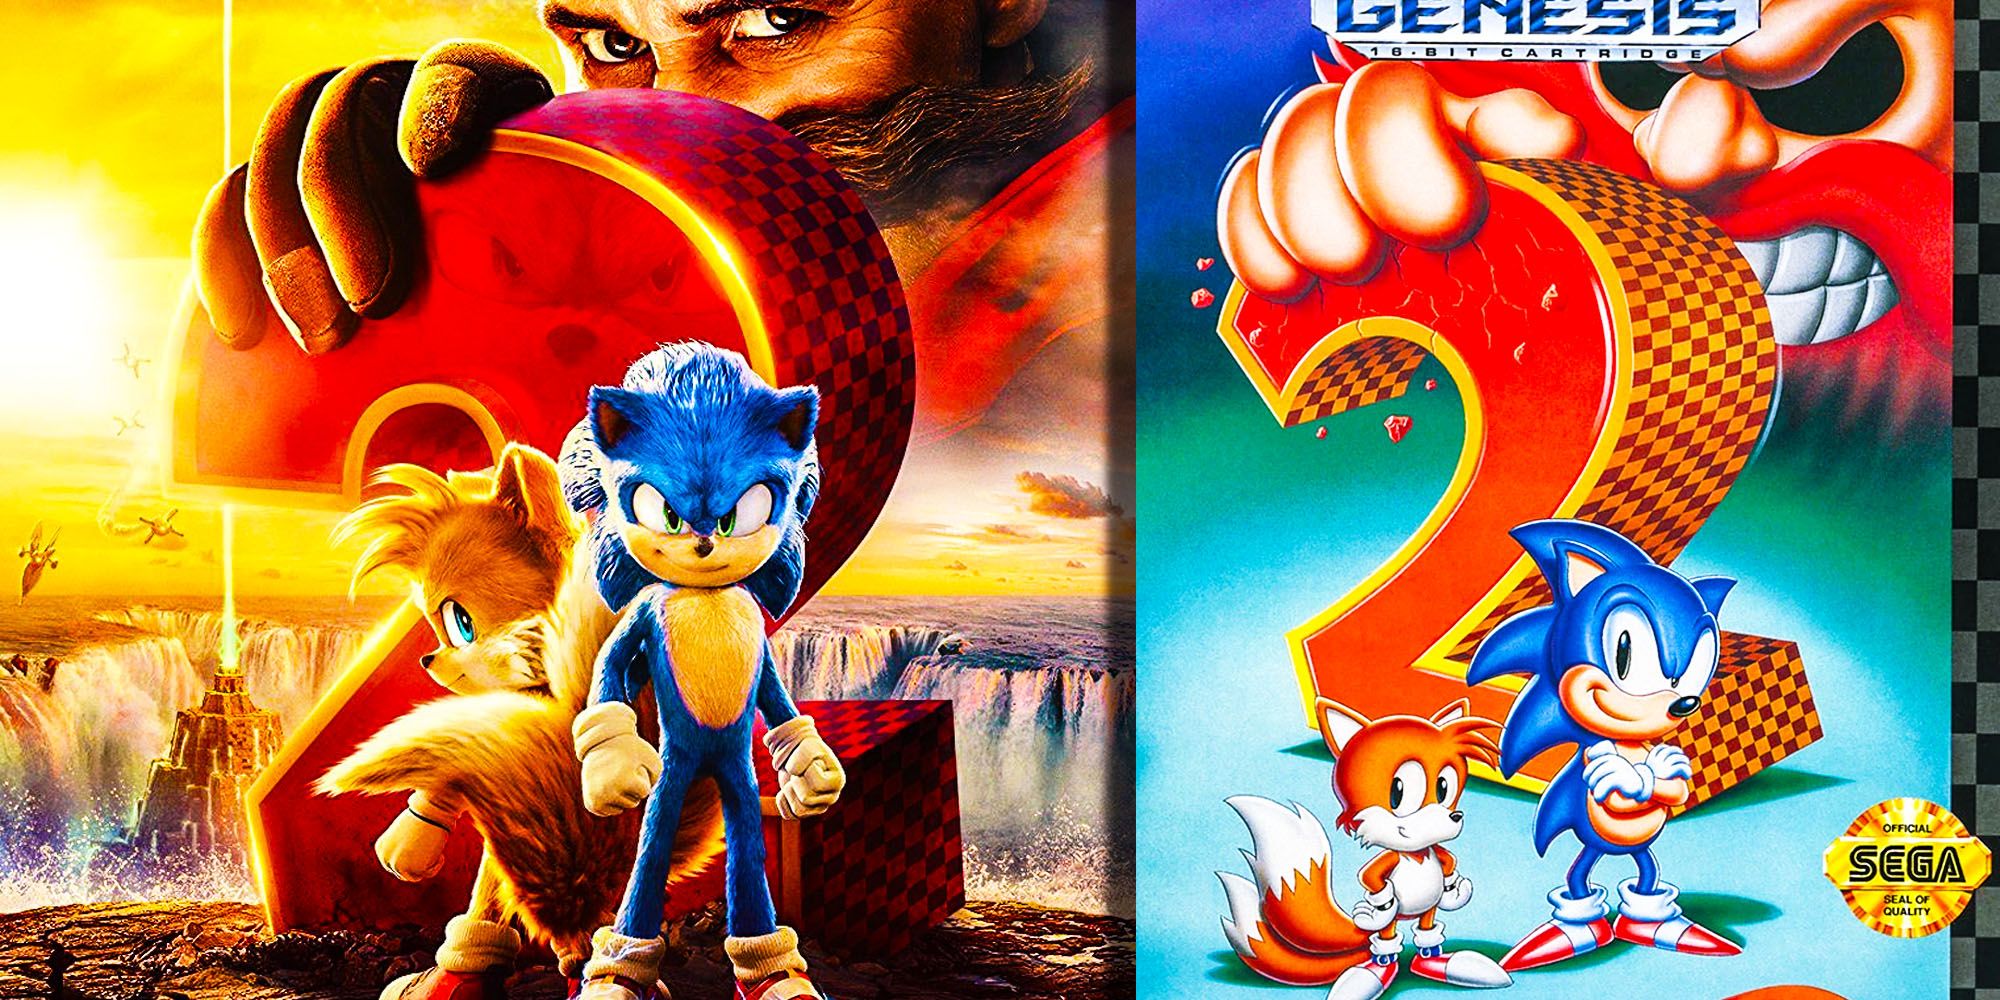 Sonic the Hedgehog 2 poster hints the sequel is fixing the first movie game issue